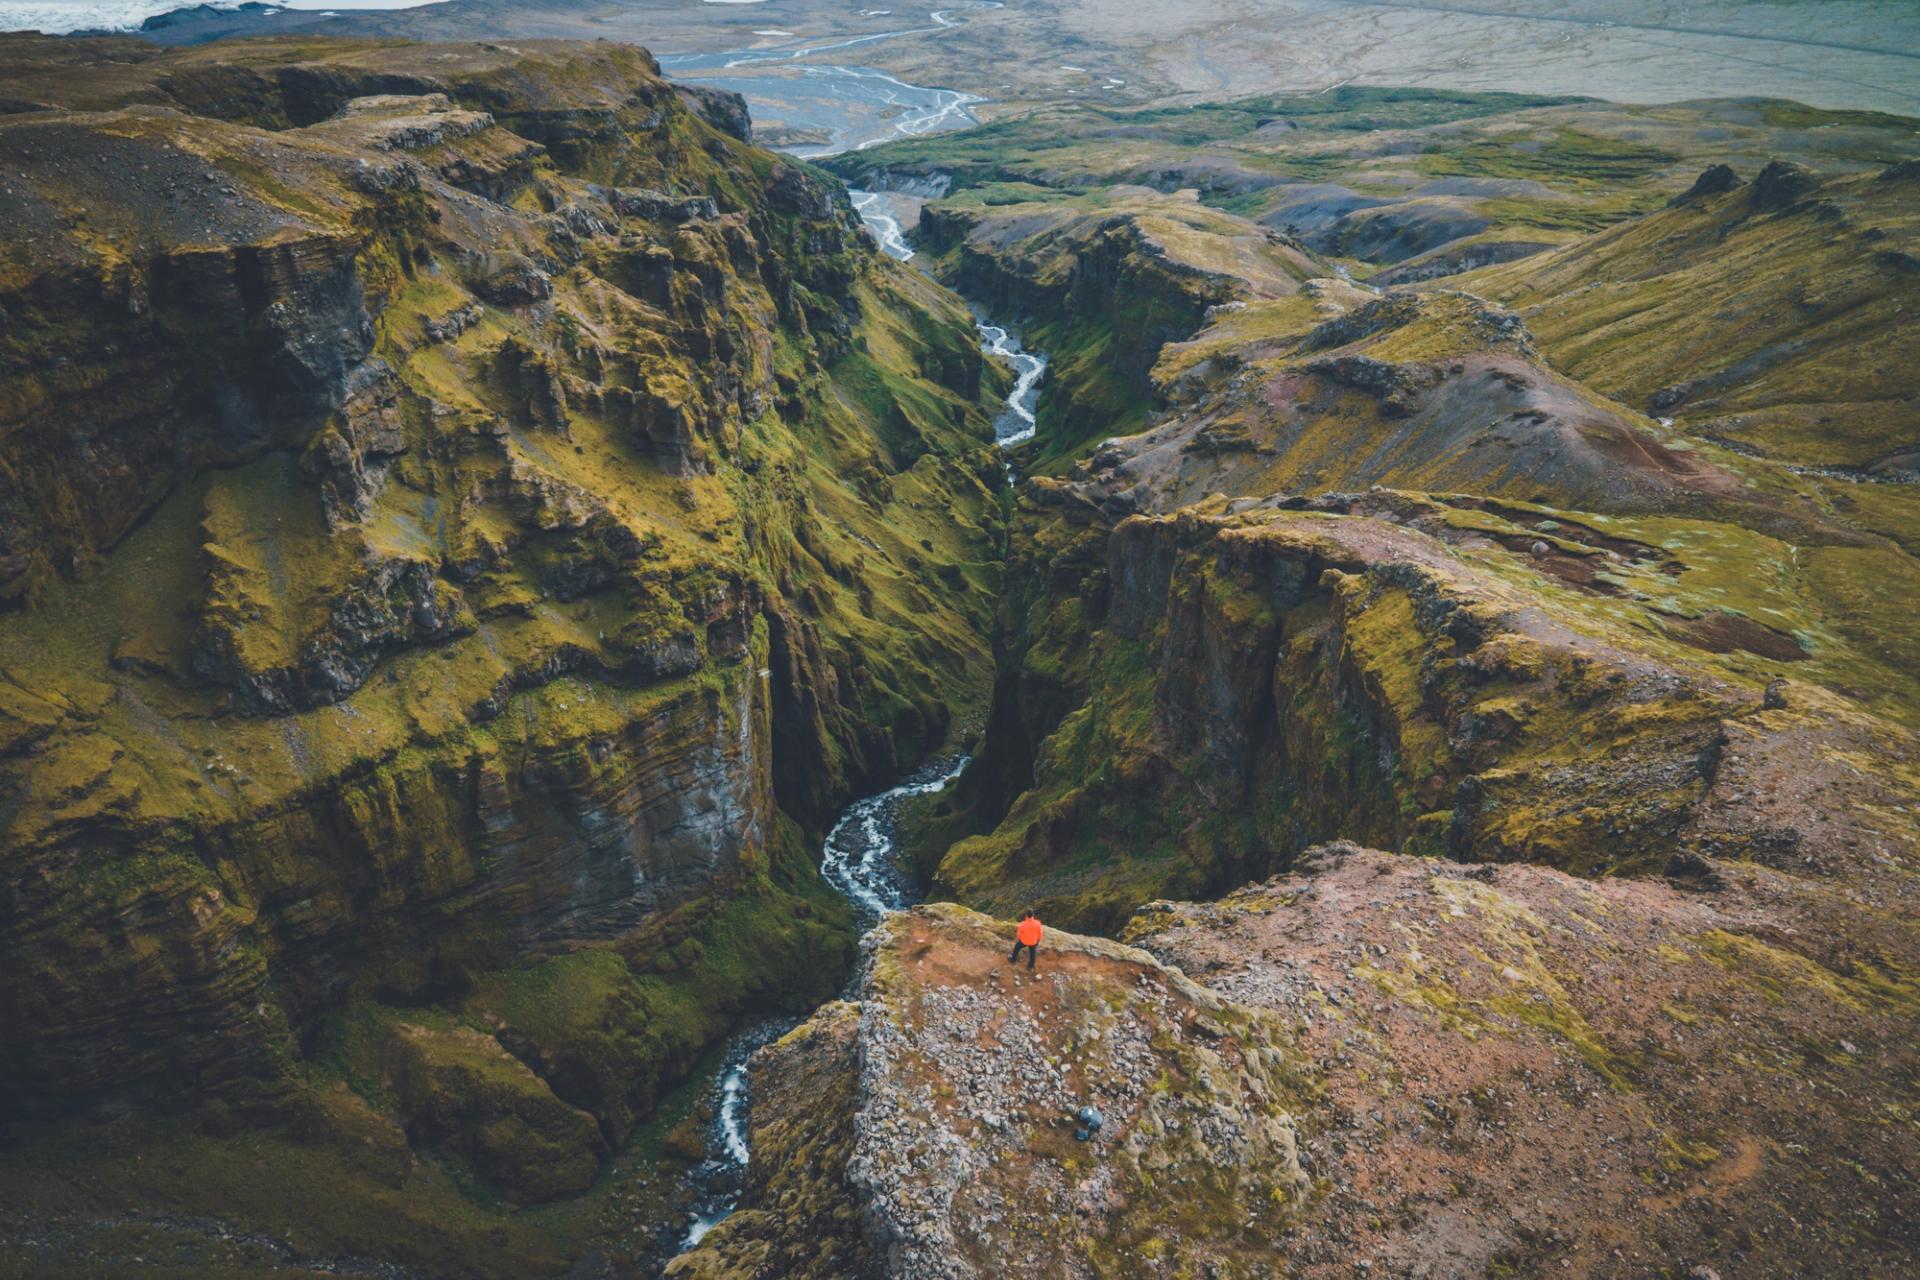 A breathtaking view of the canyons in Iceland during the South Coast Canyons: A Journey Through Time tour.